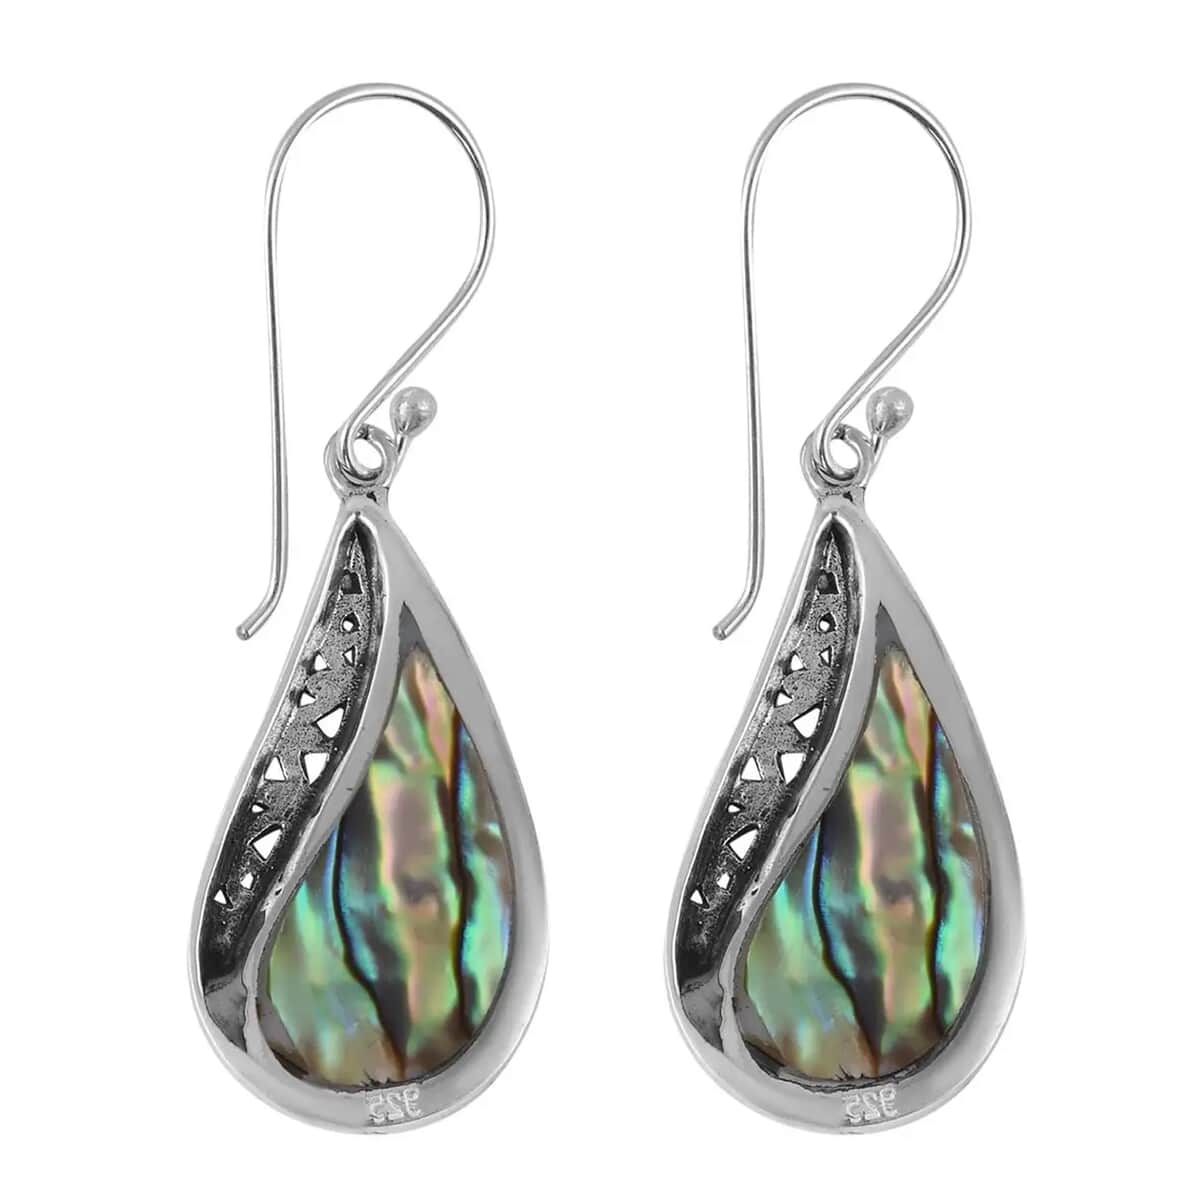 Abalone Shell Drop Earrings For Women in Sterling Silver, Beach Fashion Jewelry image number 7